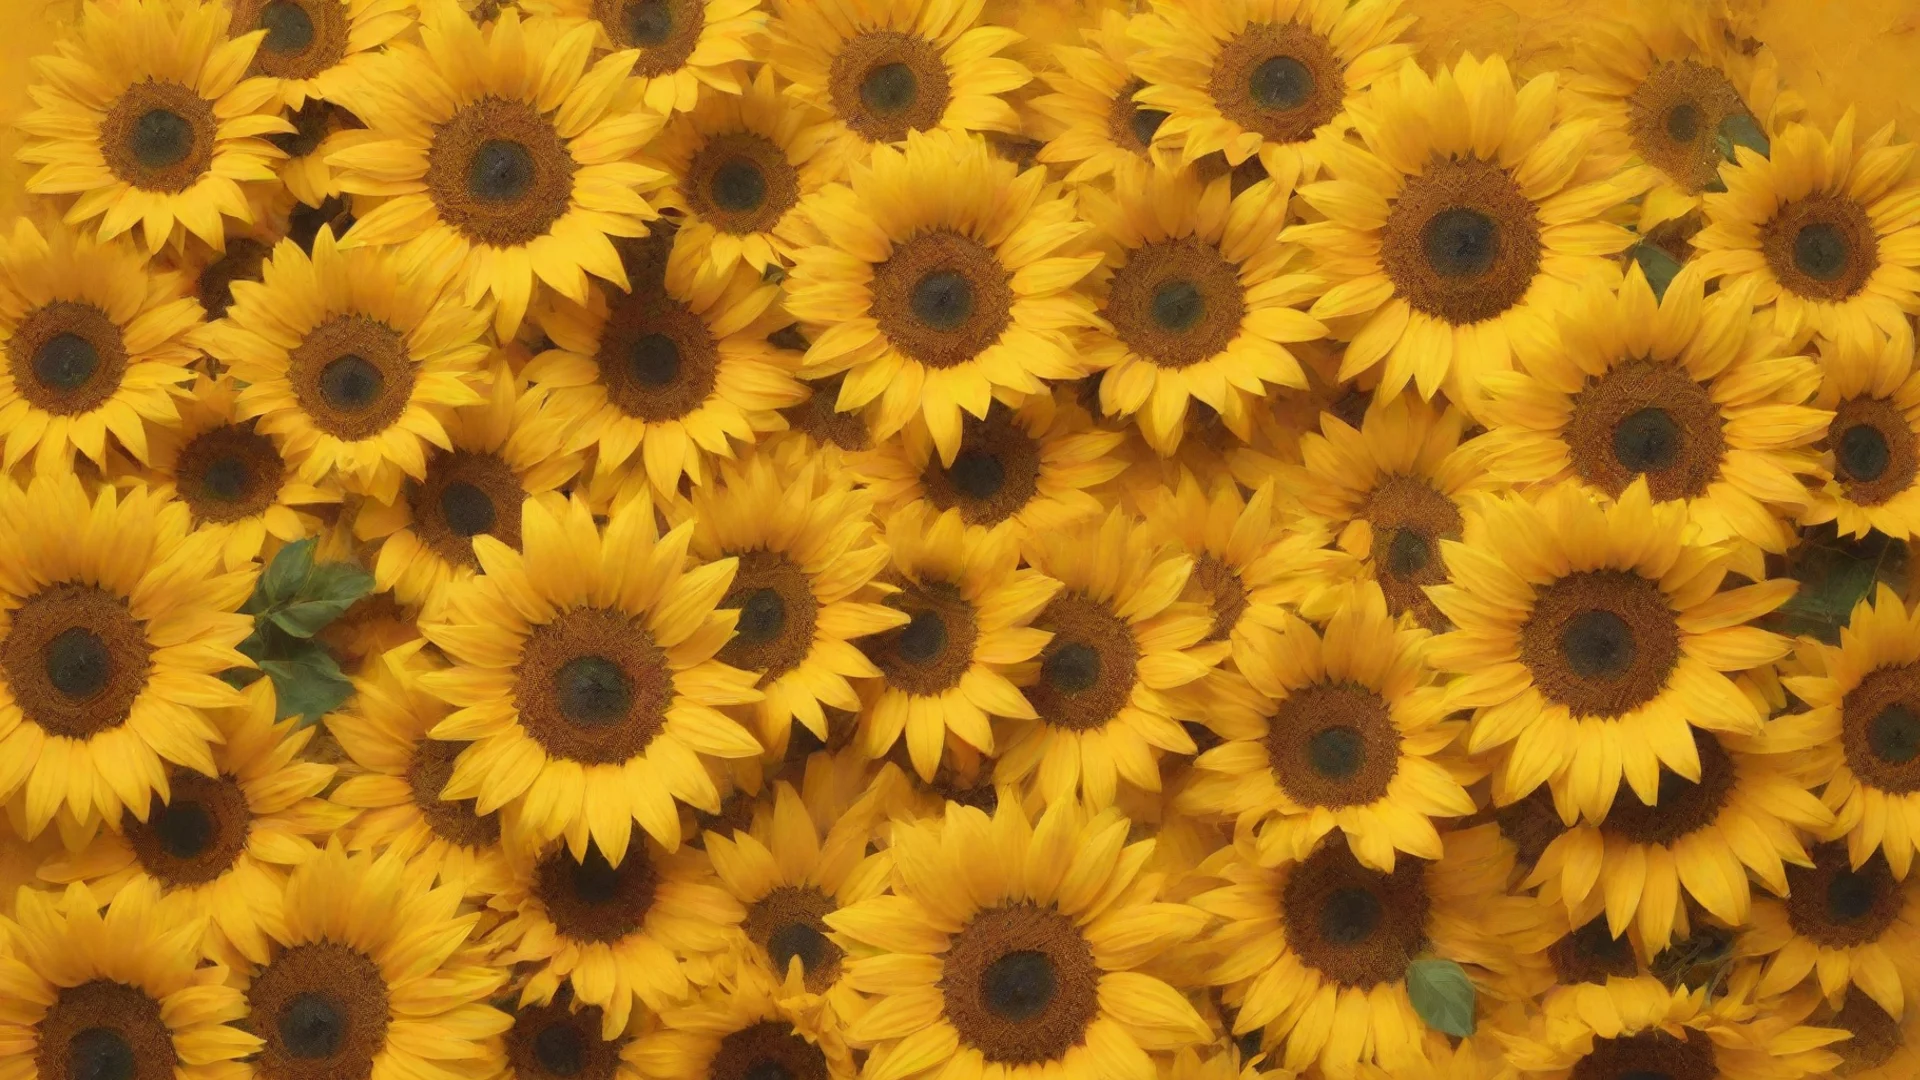 aitrending swirling yellow background with sunflowers strewn about good looking fantastic 1 wide